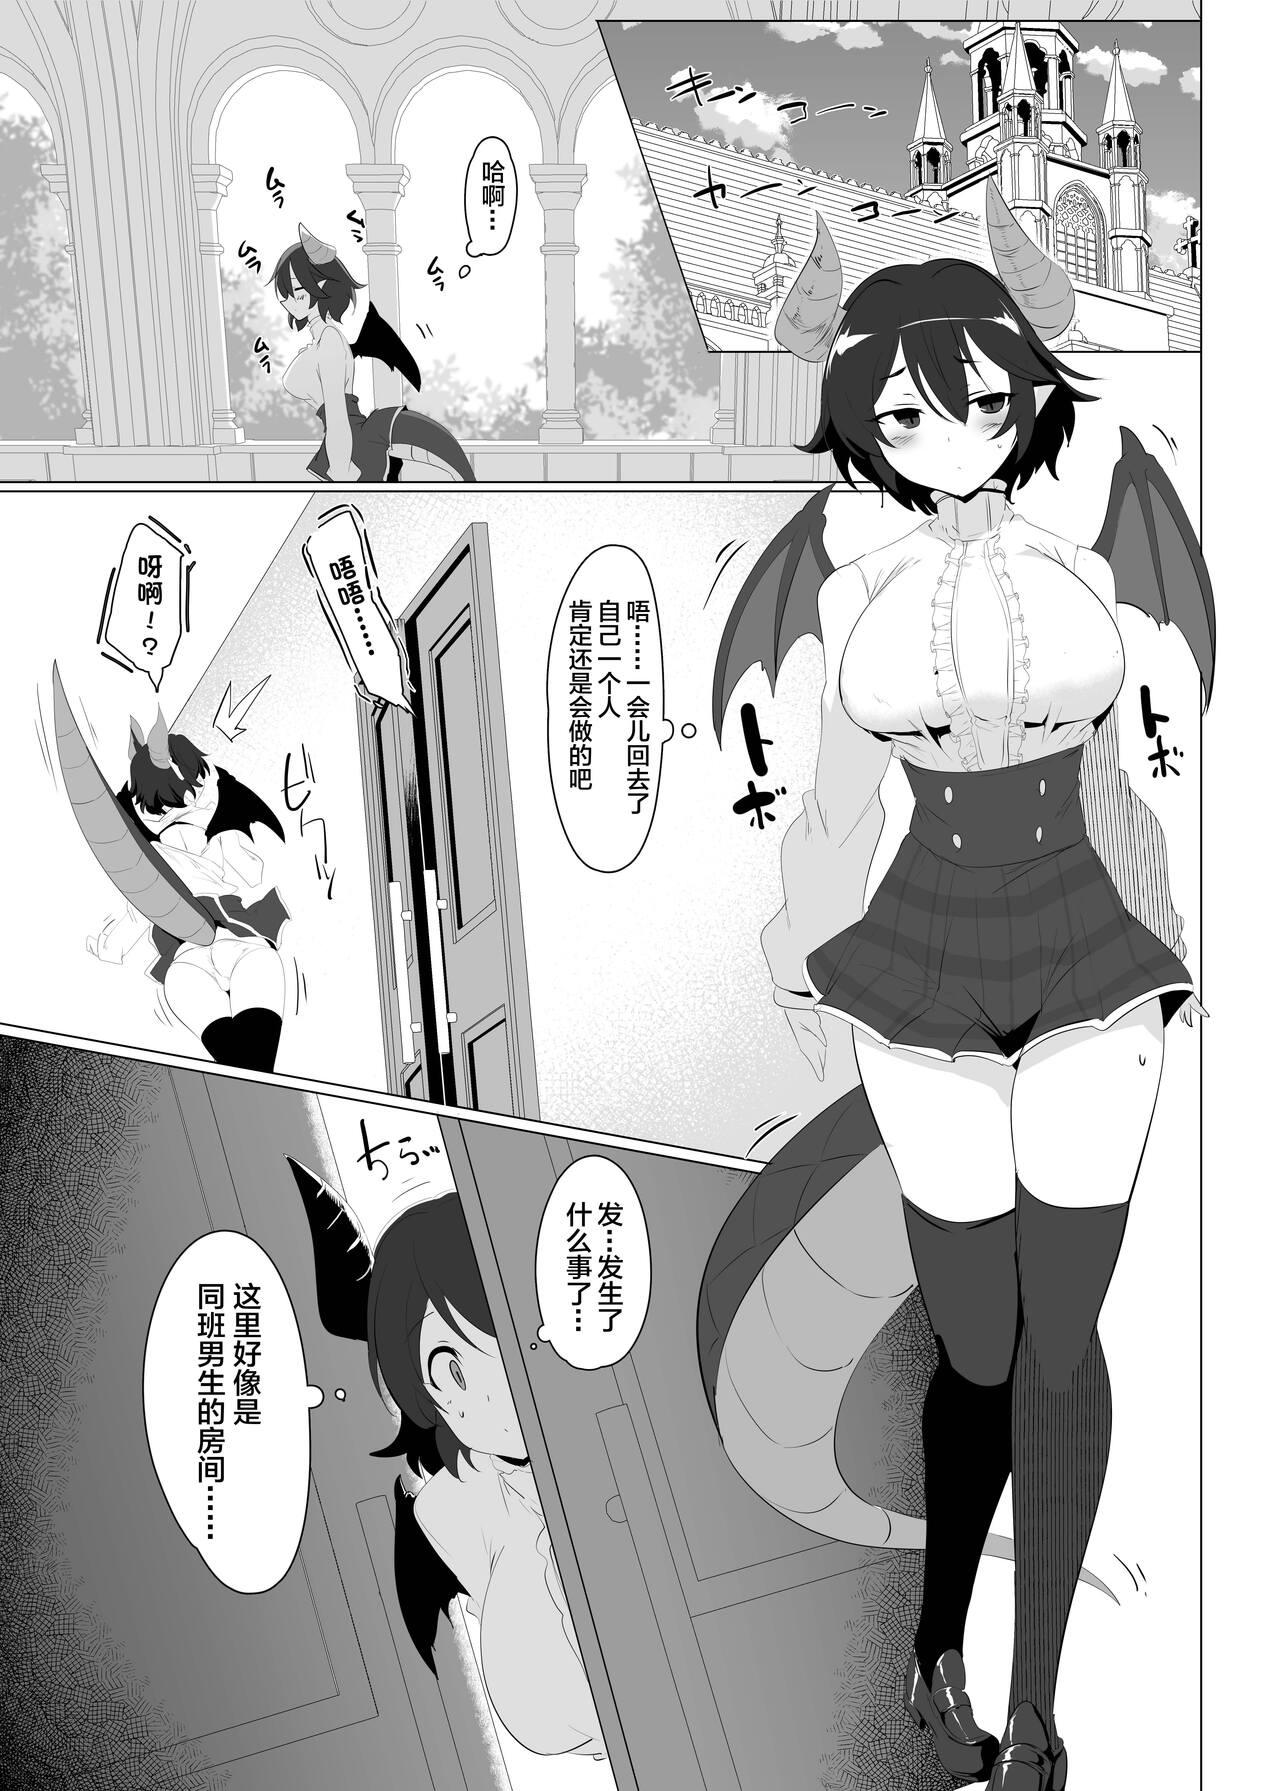 Flash There's No Way An Ecchi Event Will Happen Between the Dragon Princess of Manaria Academy and Me, A Regular Student! - Manaria friends Village - Page 4